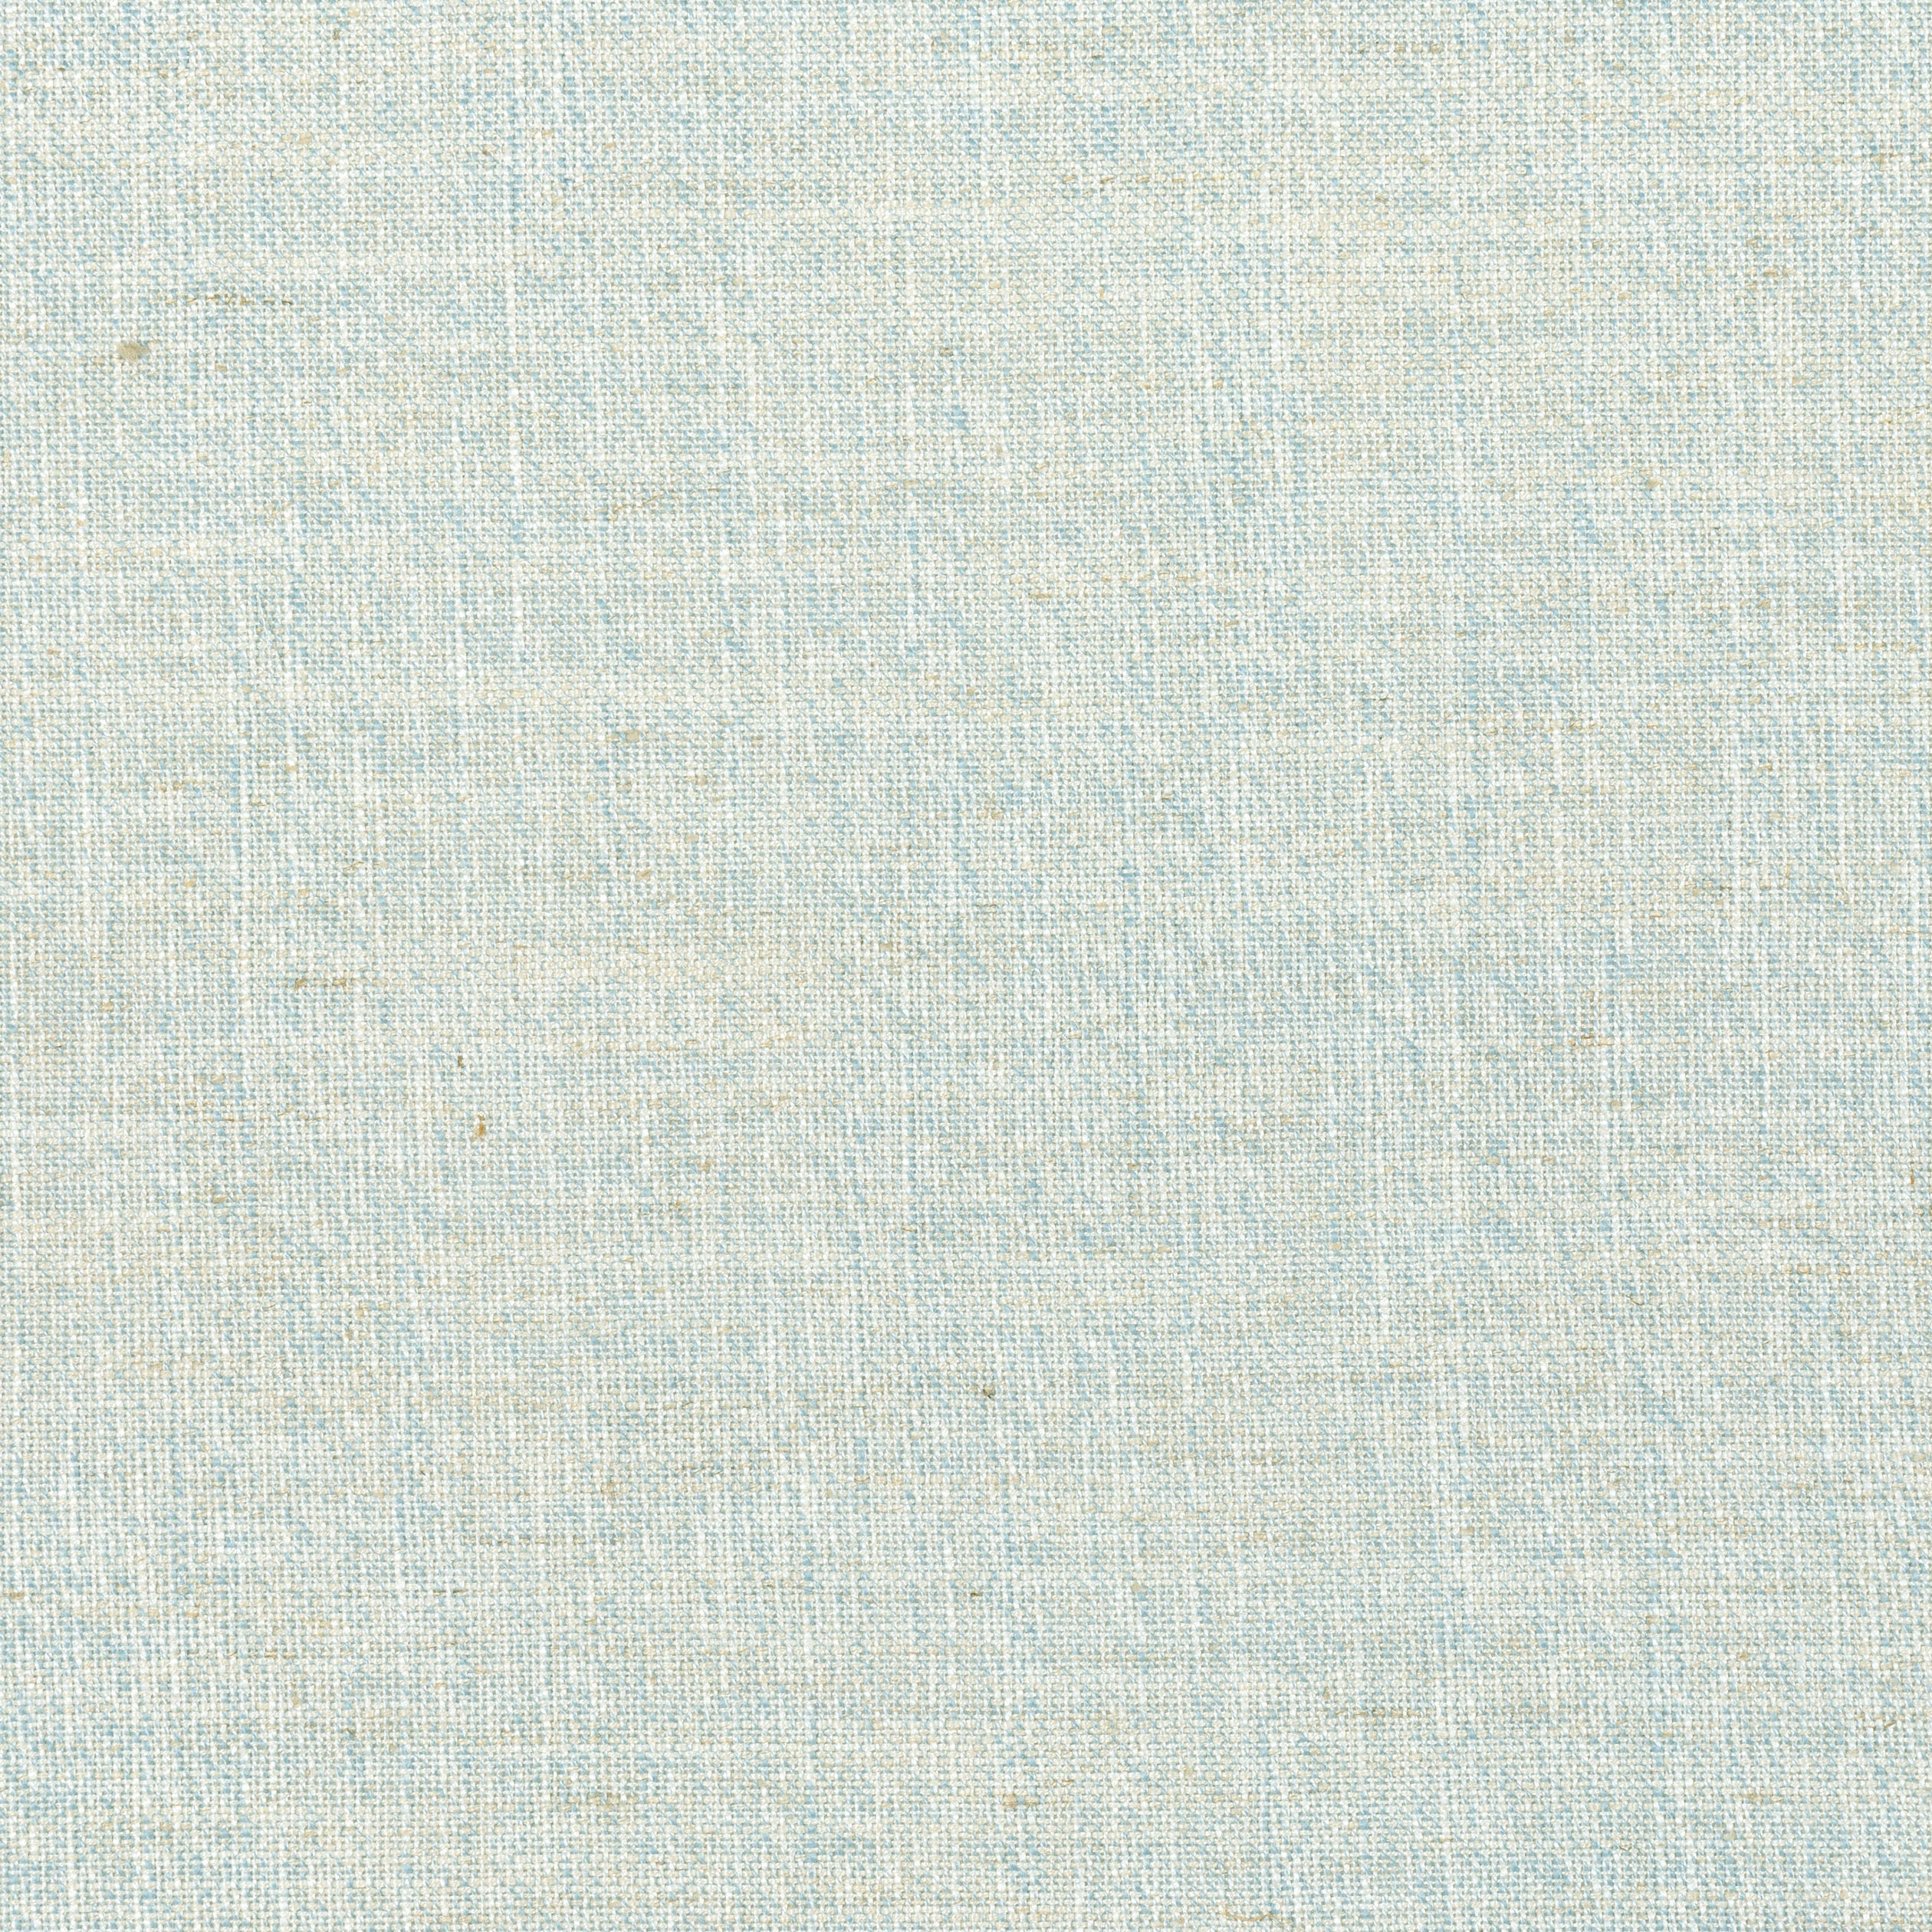 Terra Linen fabric in bluebell color - pattern number FWW7682 - by Thibaut in the Palisades collection